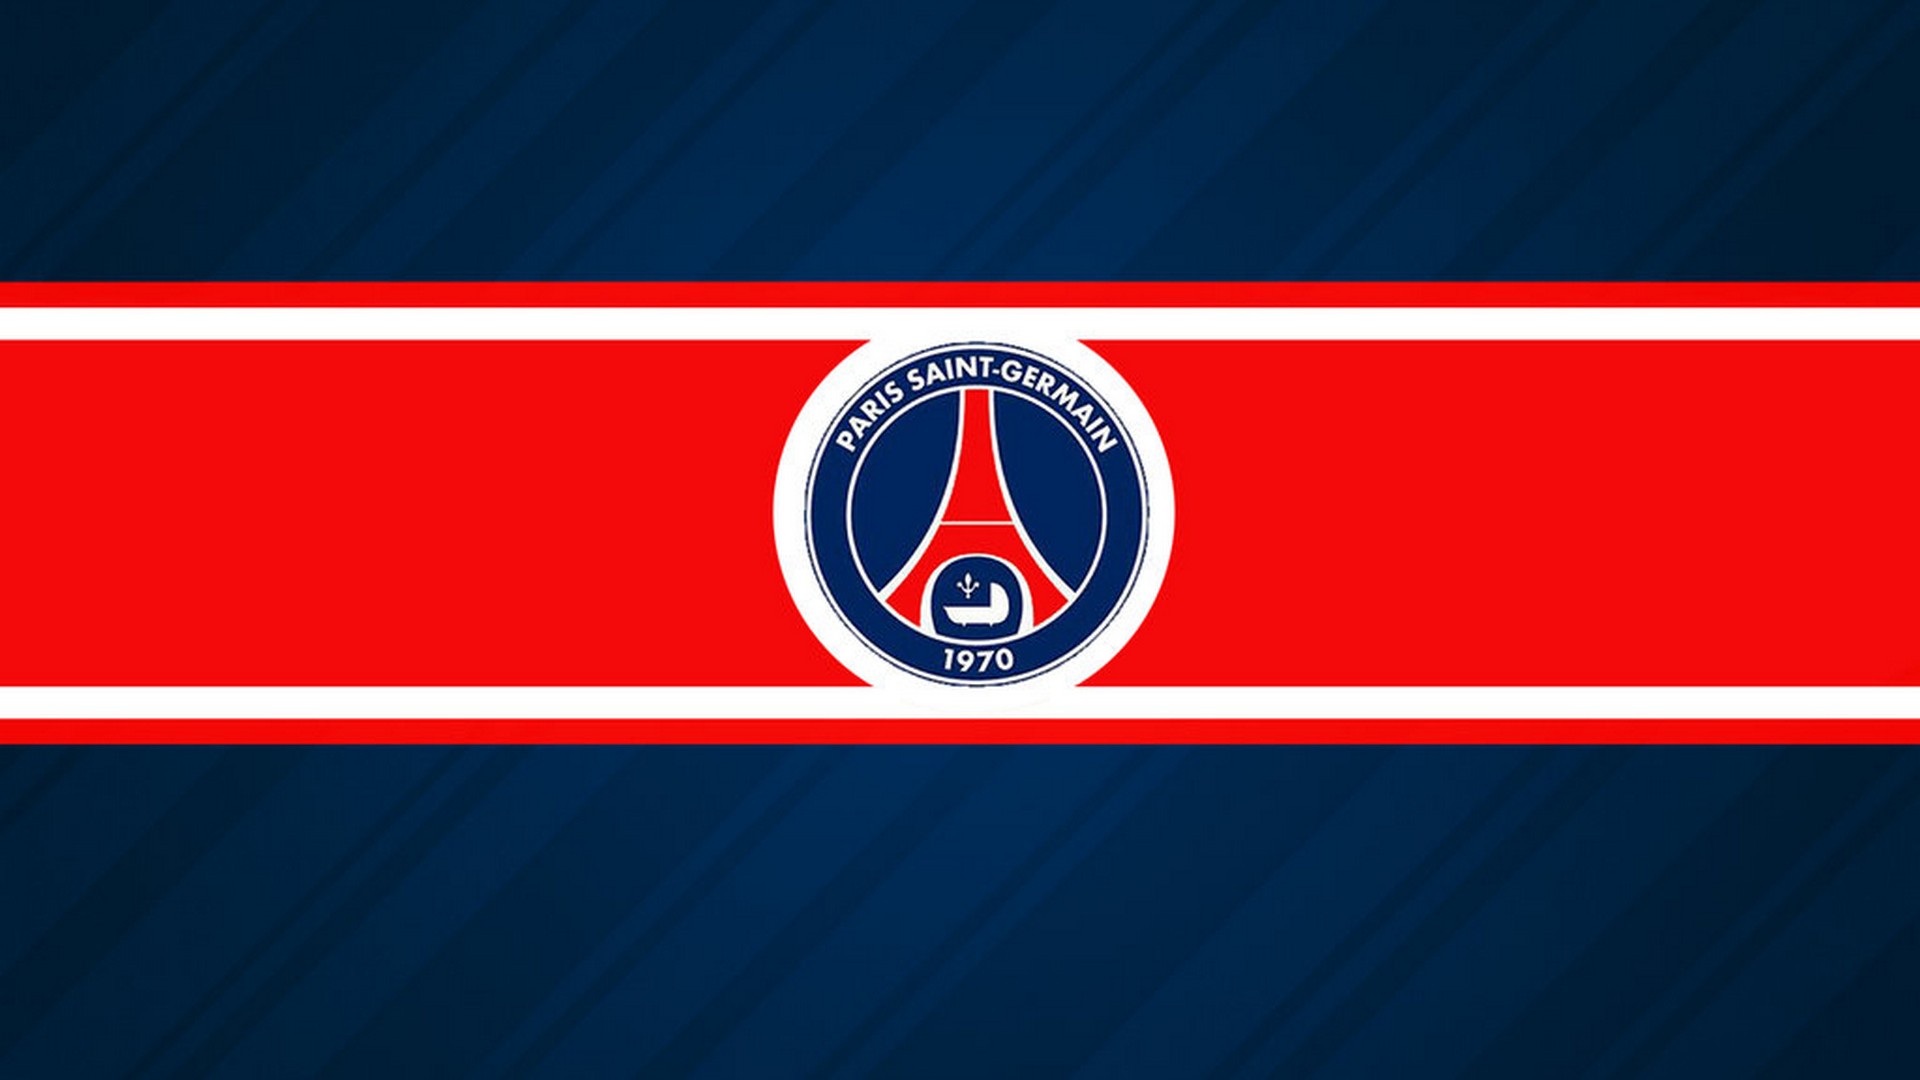 PSG Wallpaper For Mac Backgrounds with high-resolution 1920x1080 pixel. You can use this wallpaper for your Desktop Computers, Mac Screensavers, Windows Backgrounds, iPhone Wallpapers, Tablet or Android Lock screen and another Mobile device